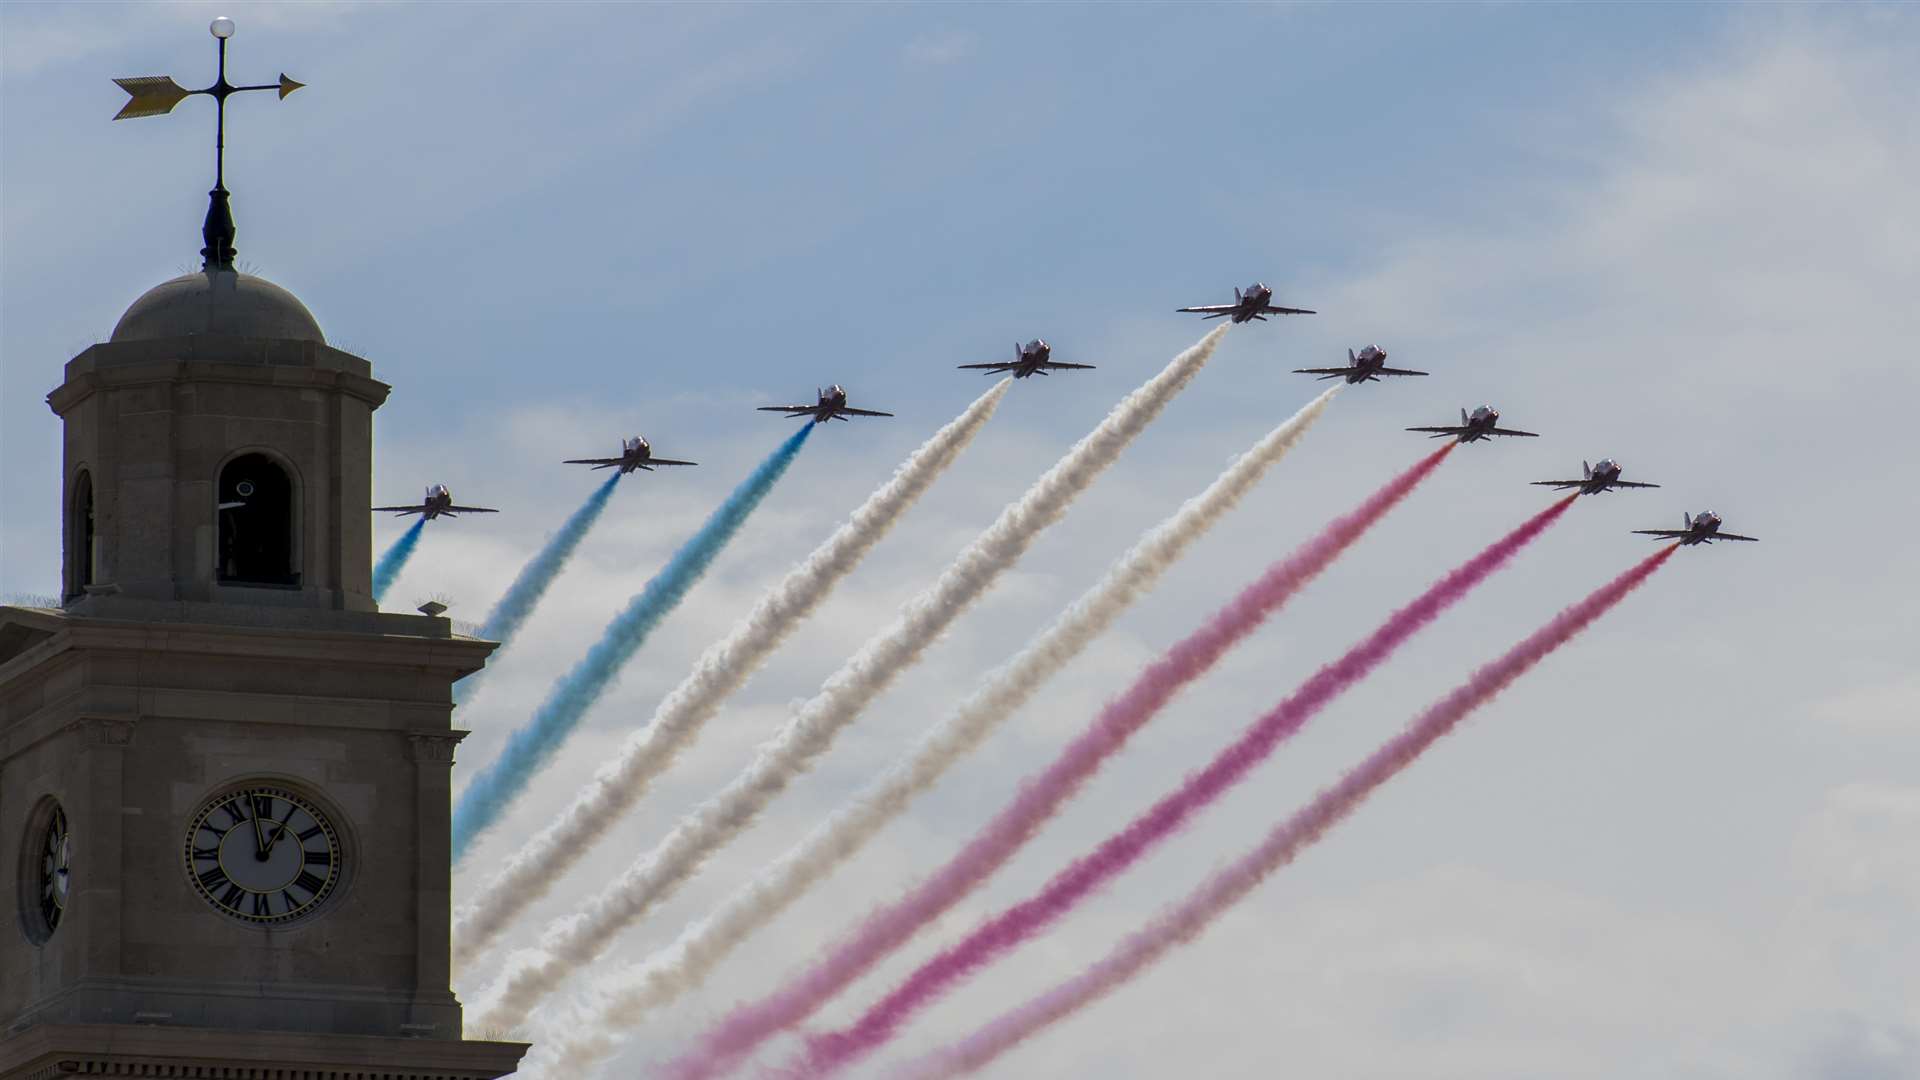 The Red Arrows have agreed to return. Picture: Nigel Hancock